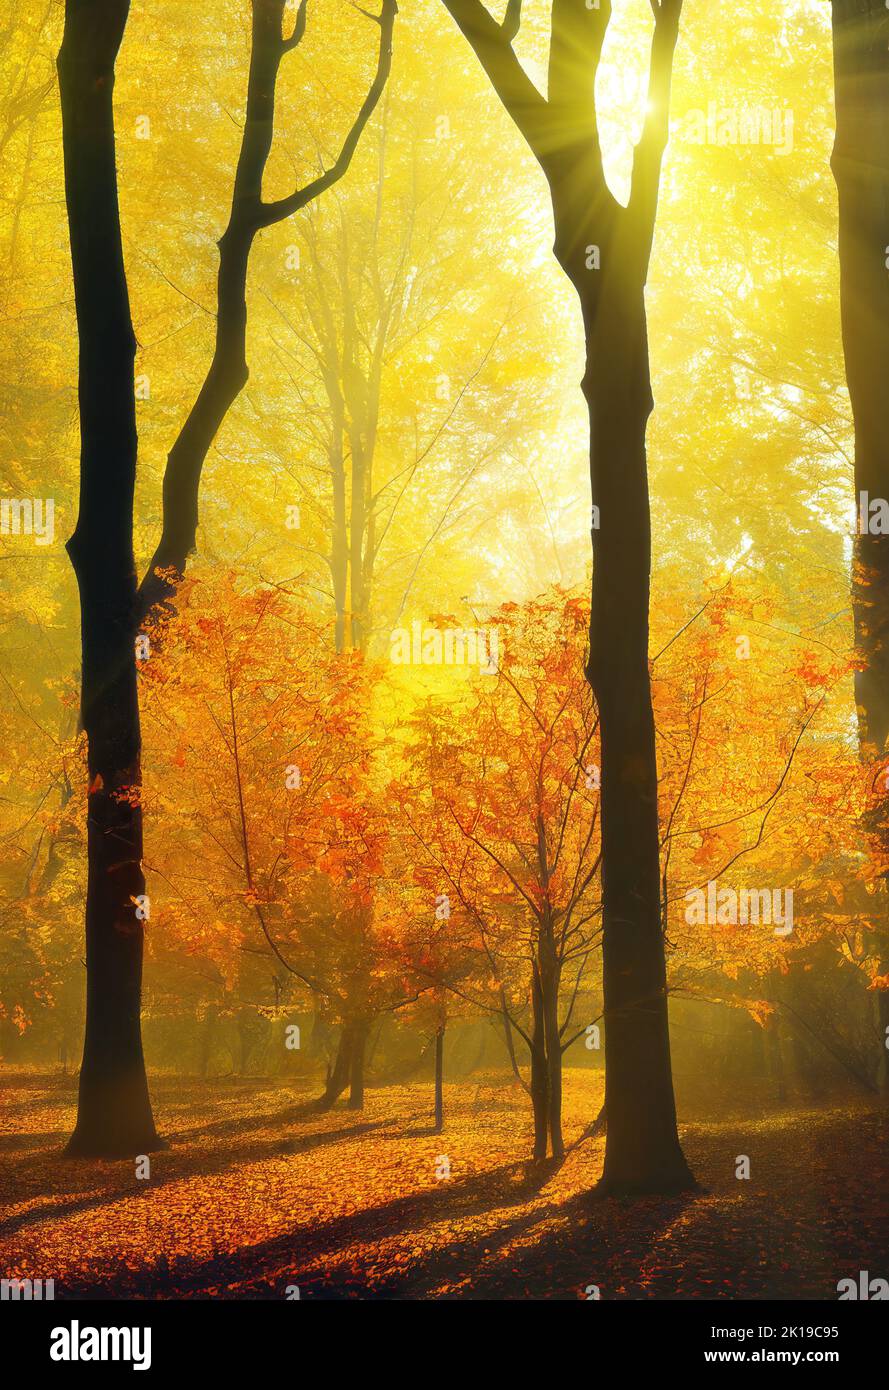 Colorful red and yellow trees in autumn forest, backlit silhouettes with sun shining through the branches, vertical format. Digital illustration based Stock Photo